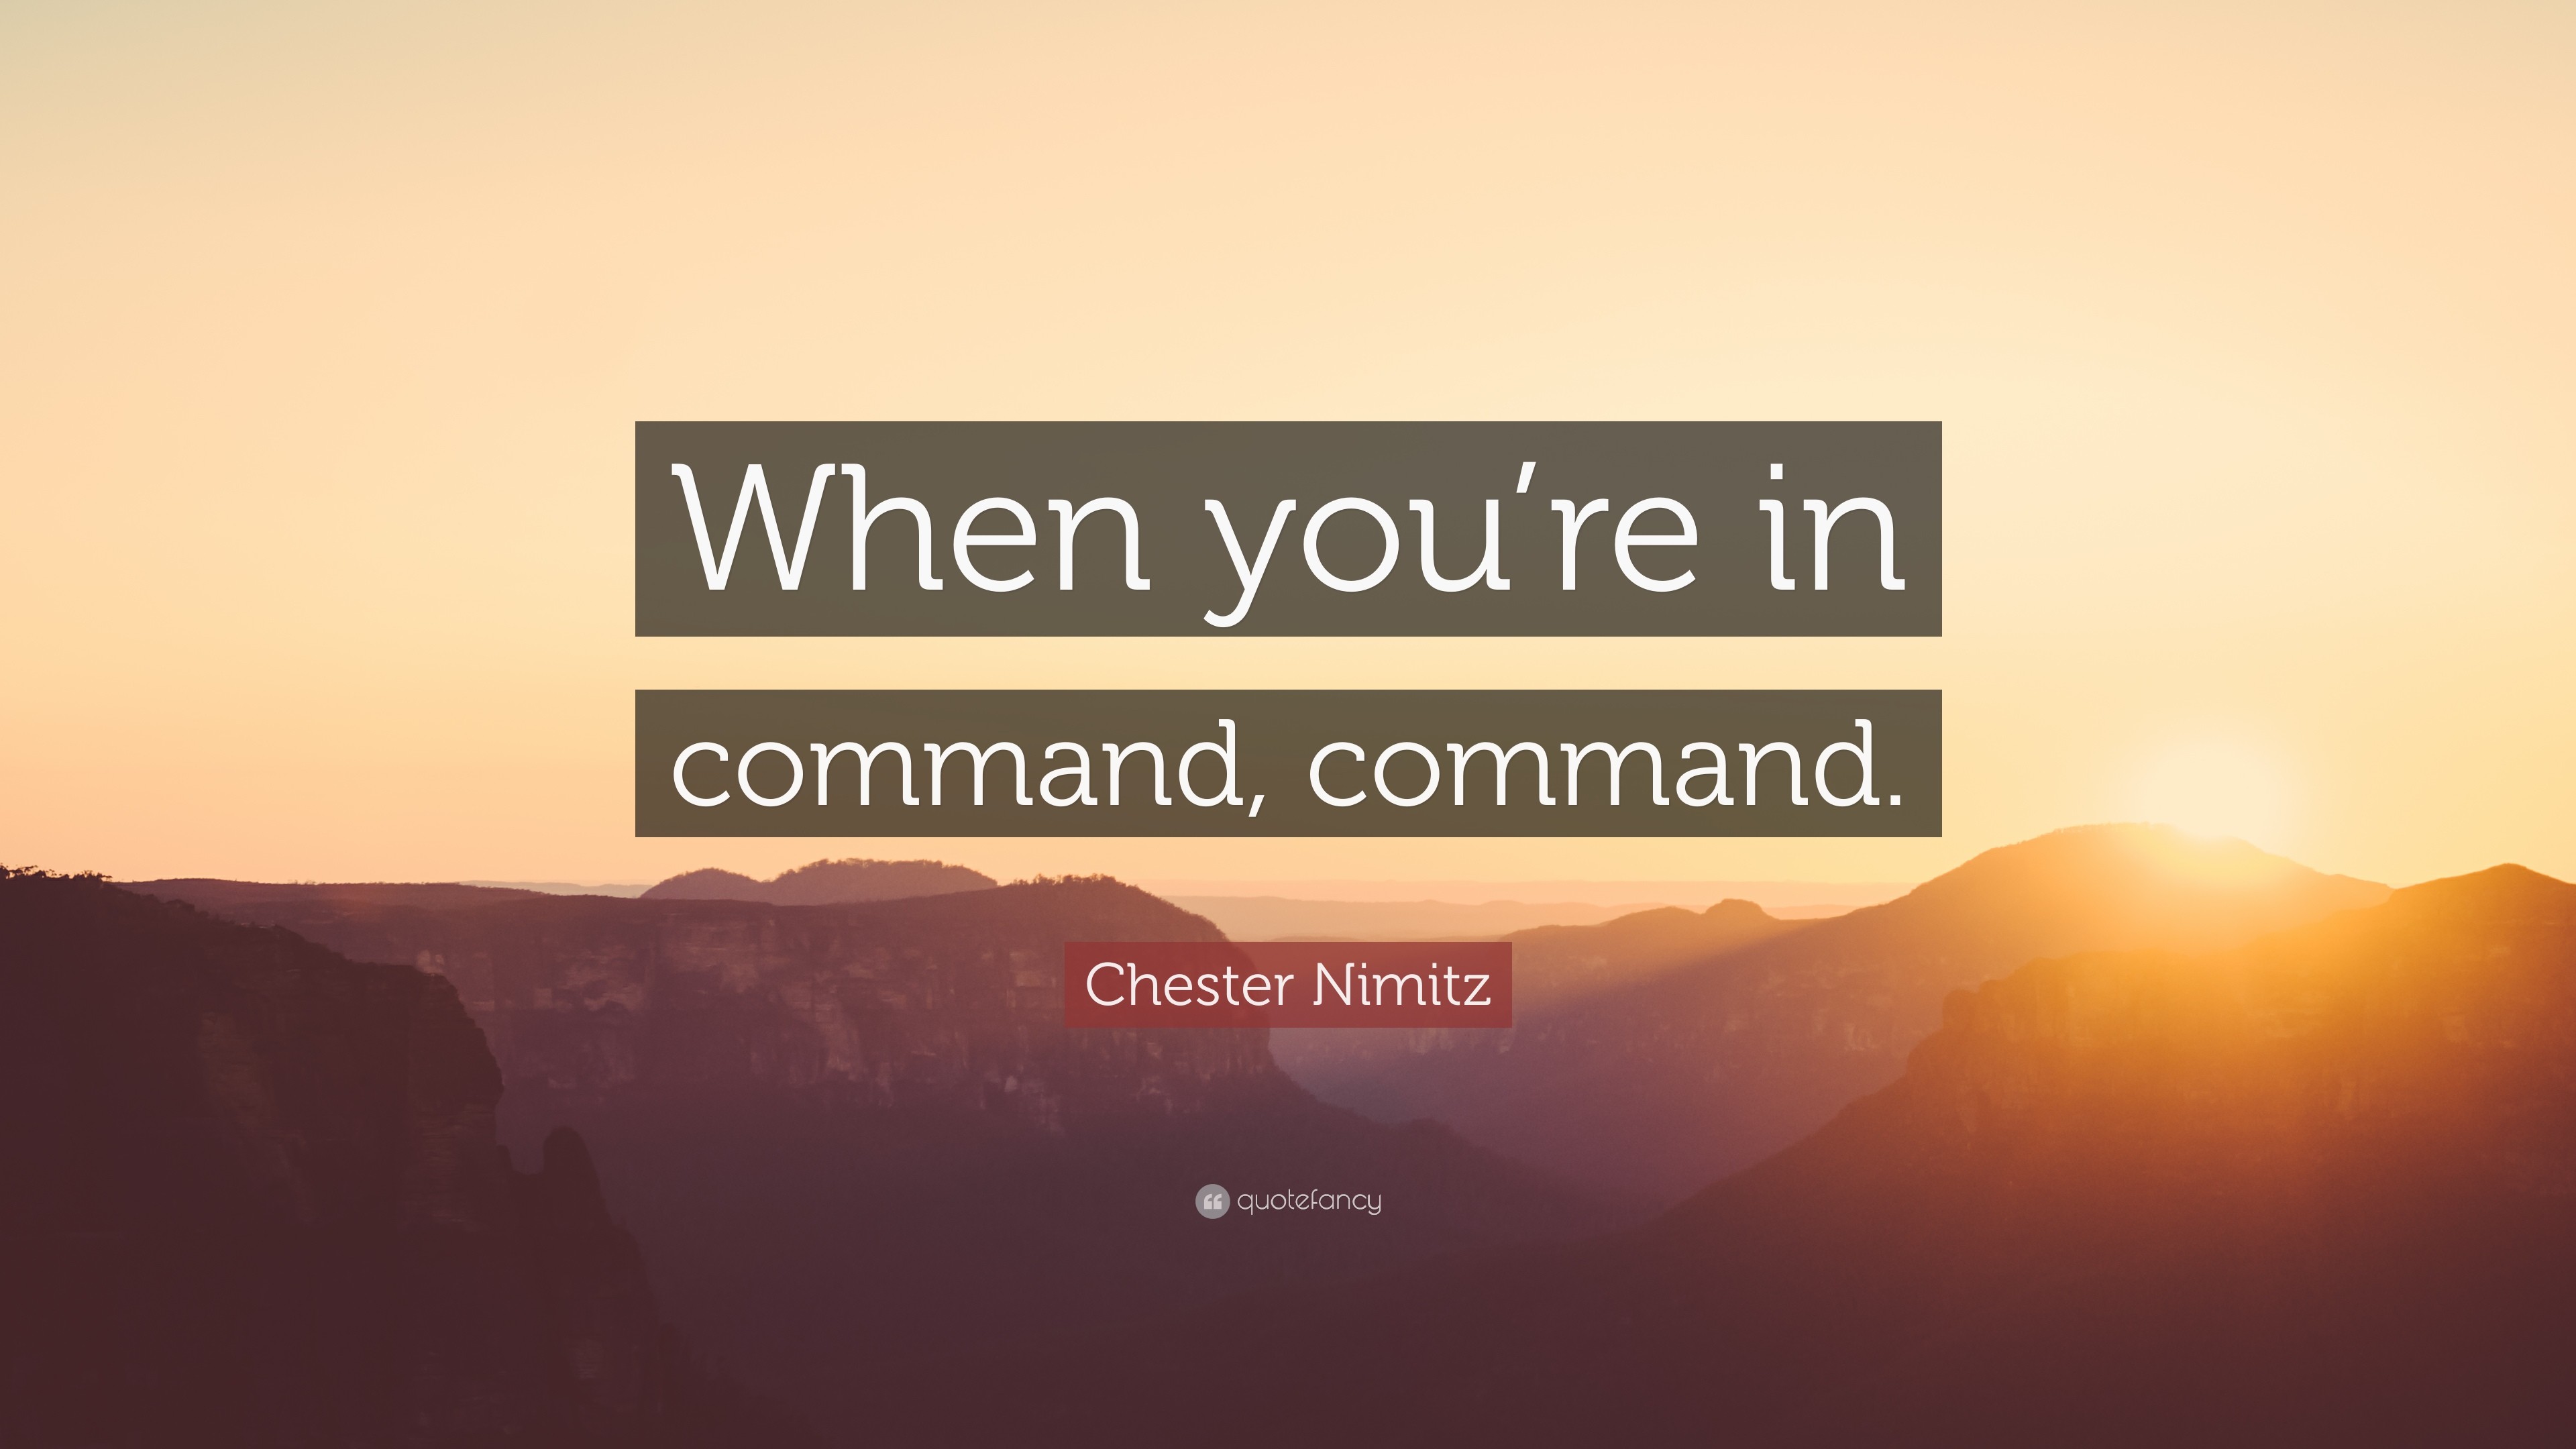 Chester Nimitz Quote When youre in command, command